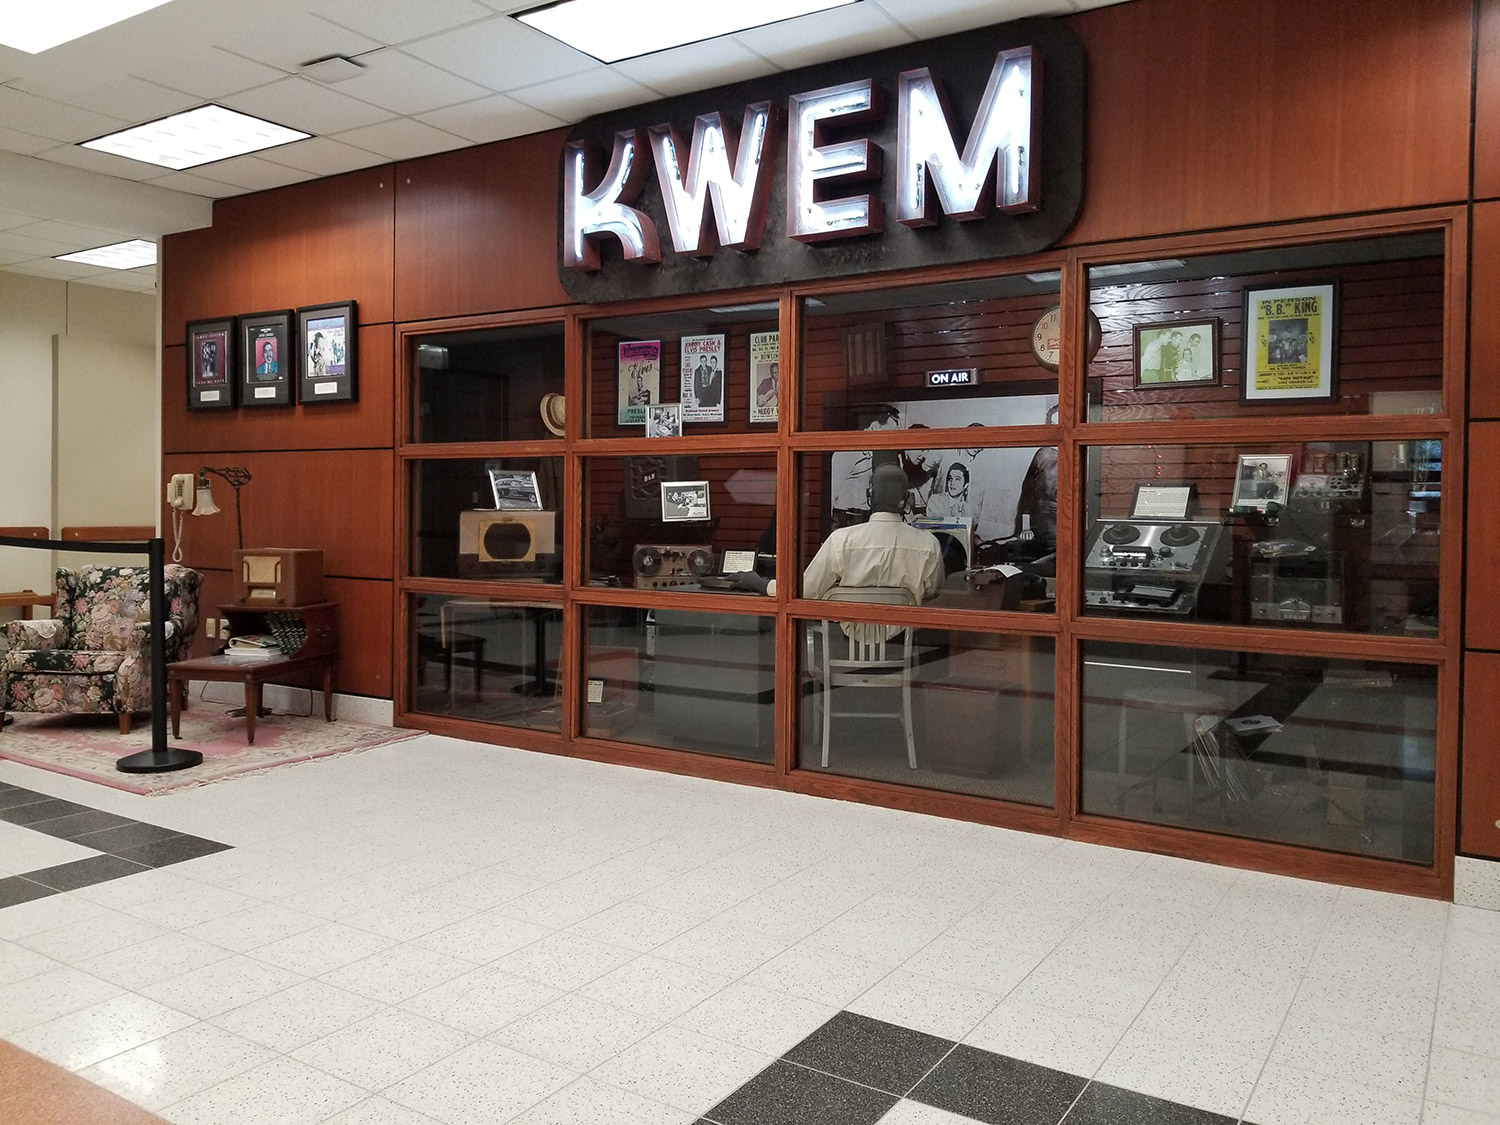 items behind glass and a sitting area with radio displayed under a sign saying KWEM